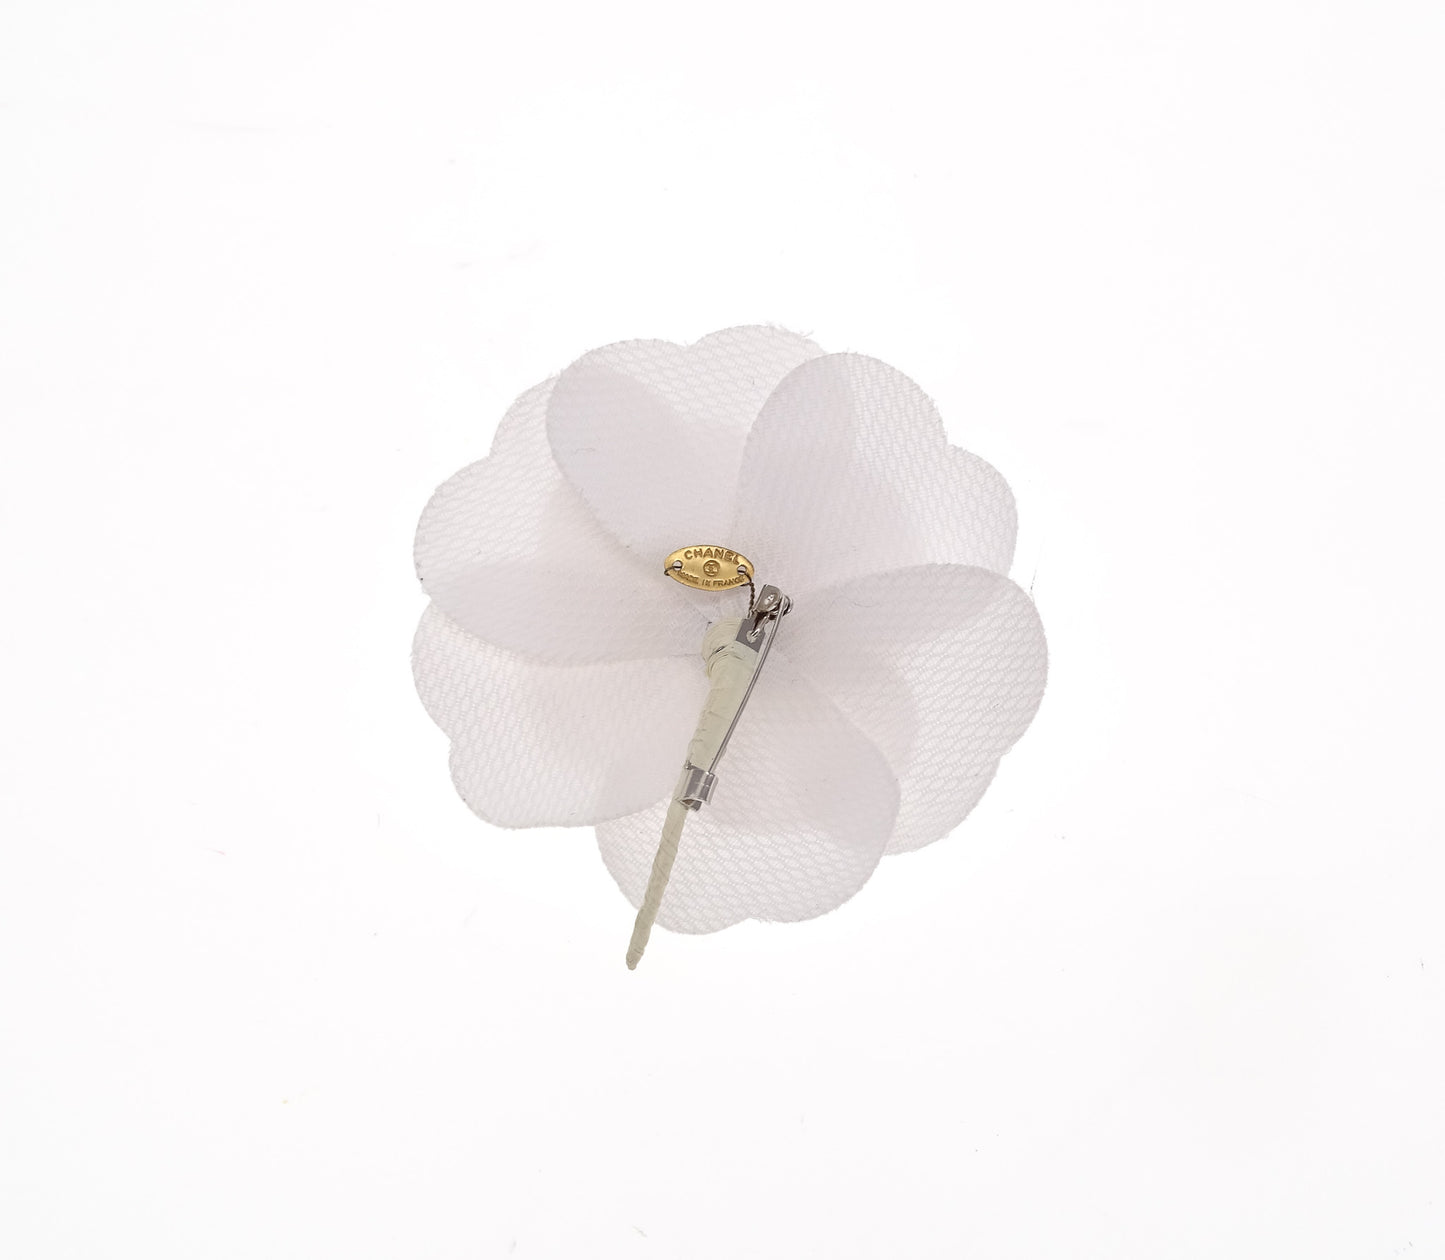 Chanel White Textured Fabric Camellia Brooch